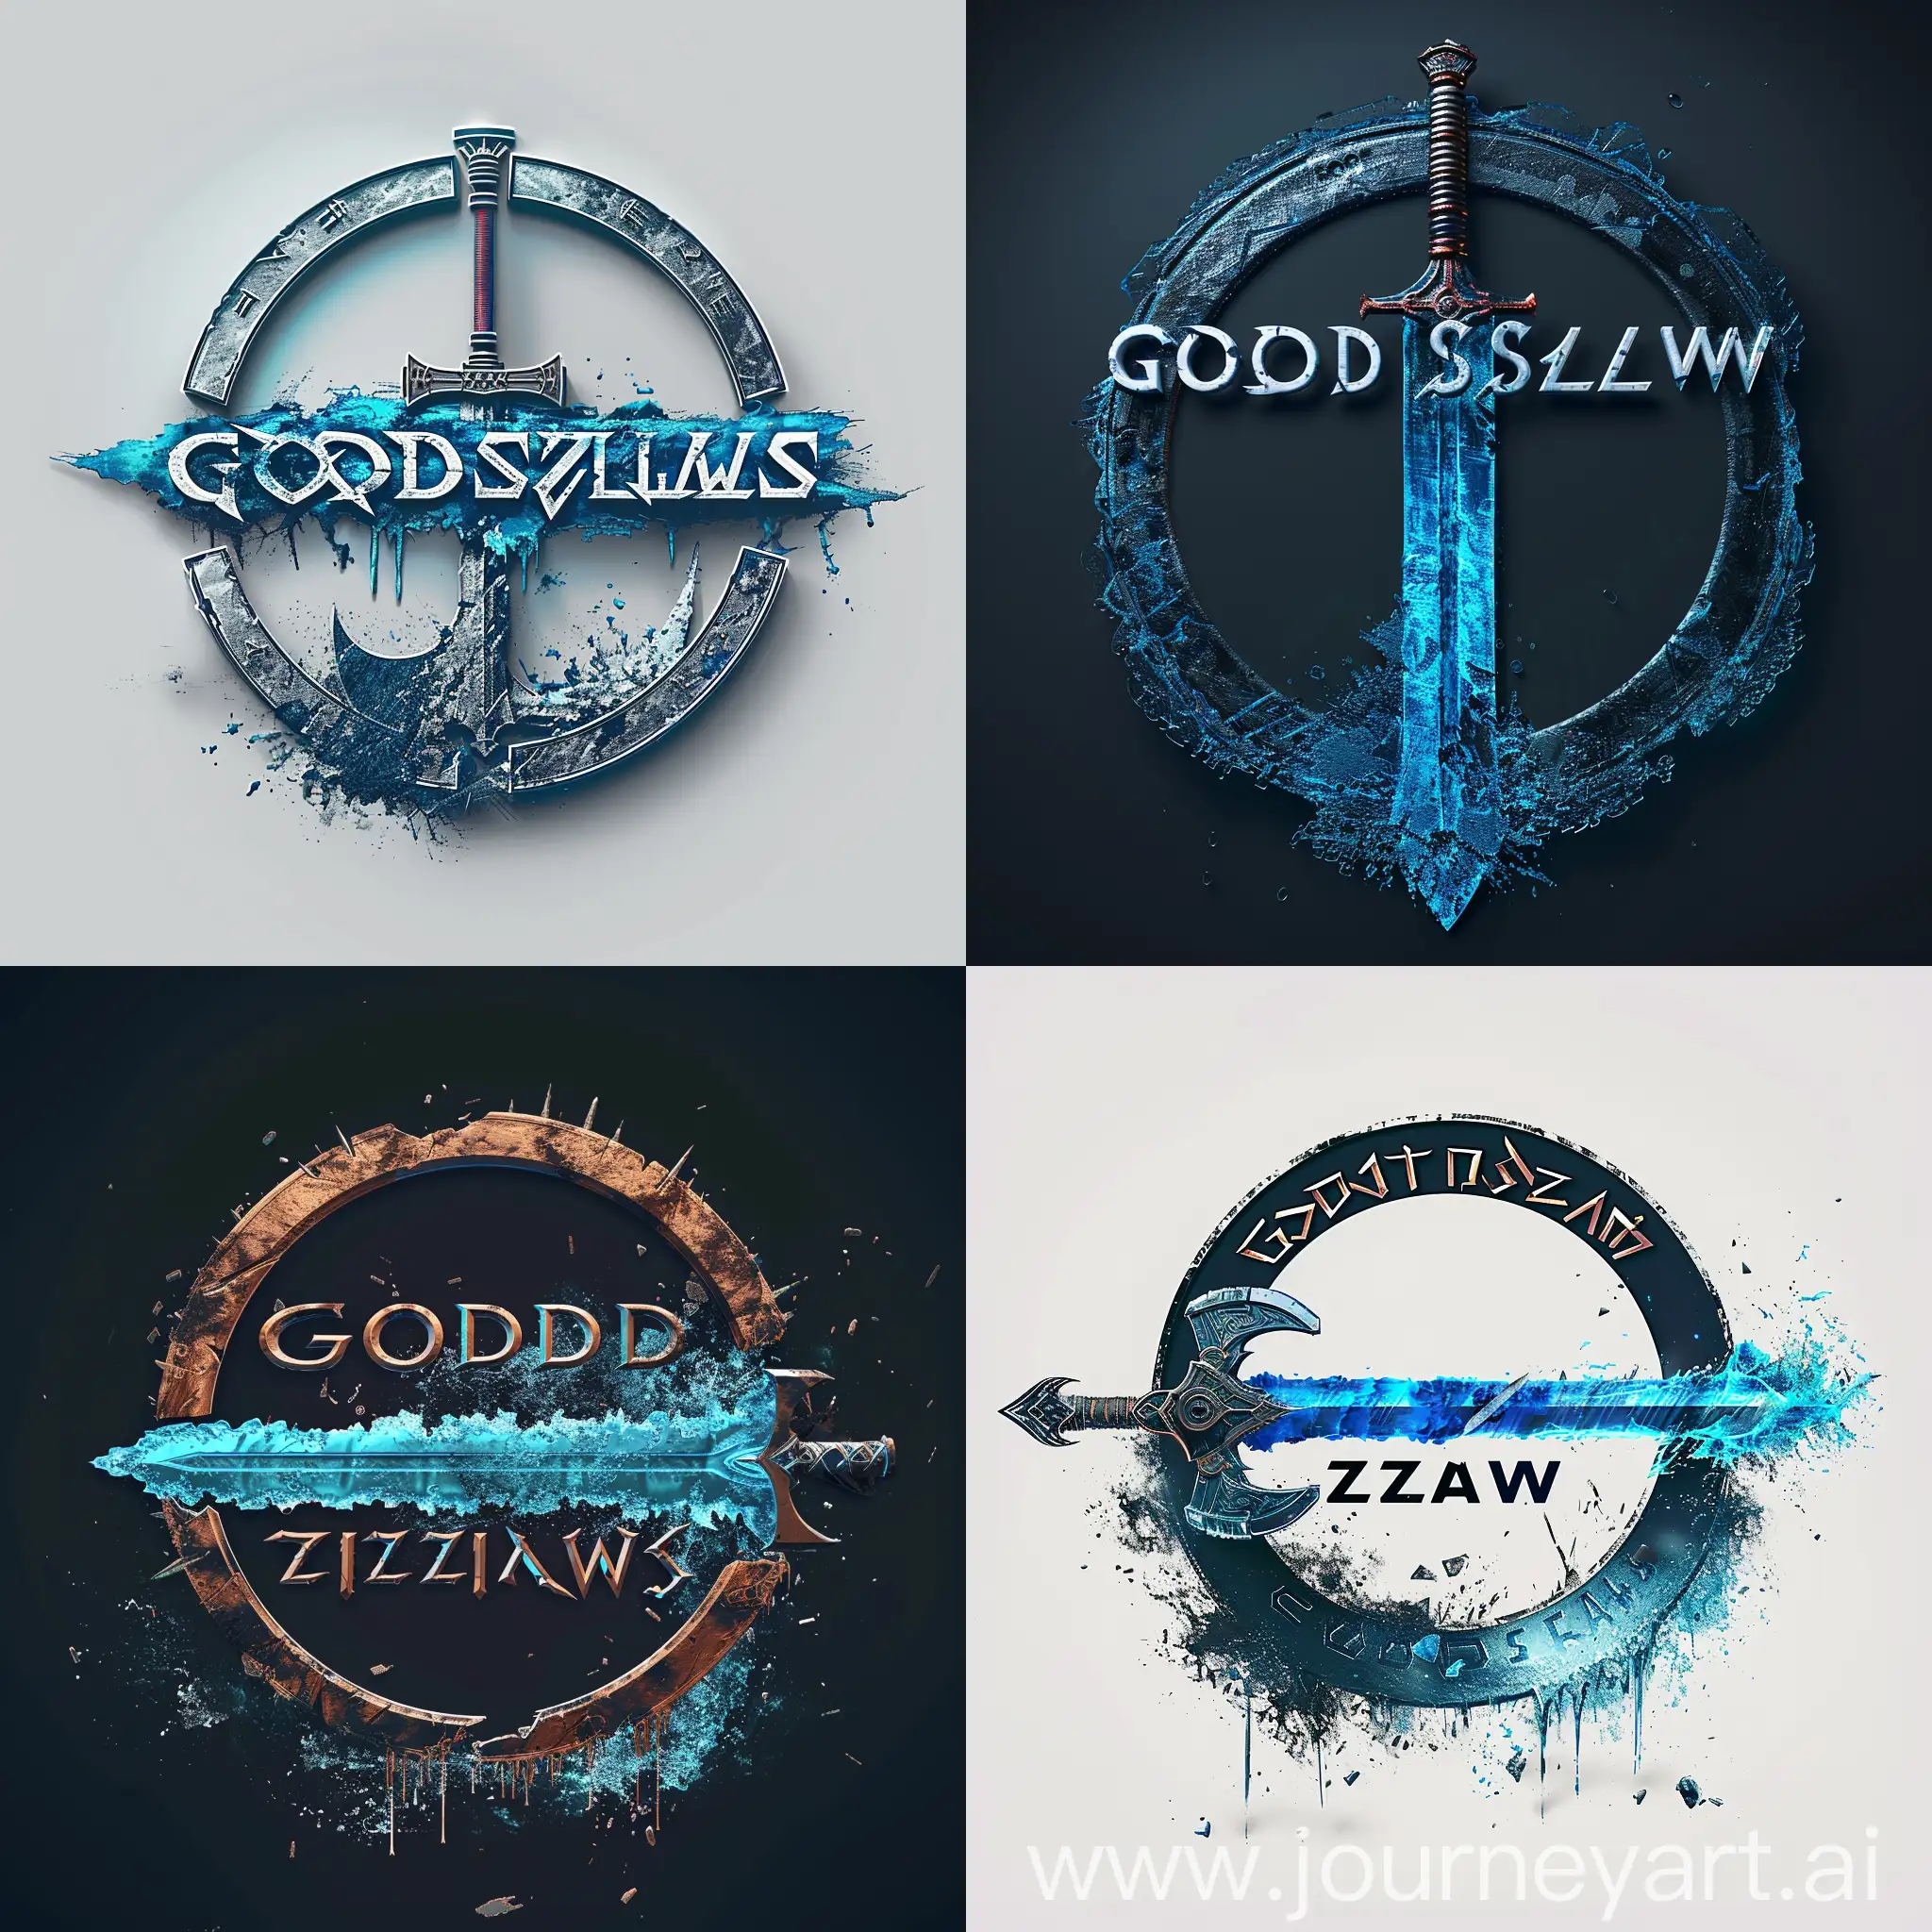 Come up with a logo for an FPS videogame about killing Nordic gods, called "Godslayer". Be inspired by the Fallout videogame franchise logo or the Elder Scrolls videogame logo. Have a futuristic viking sword infused with blue resin go through the text, and the bottom of the circle should be deteriorating.